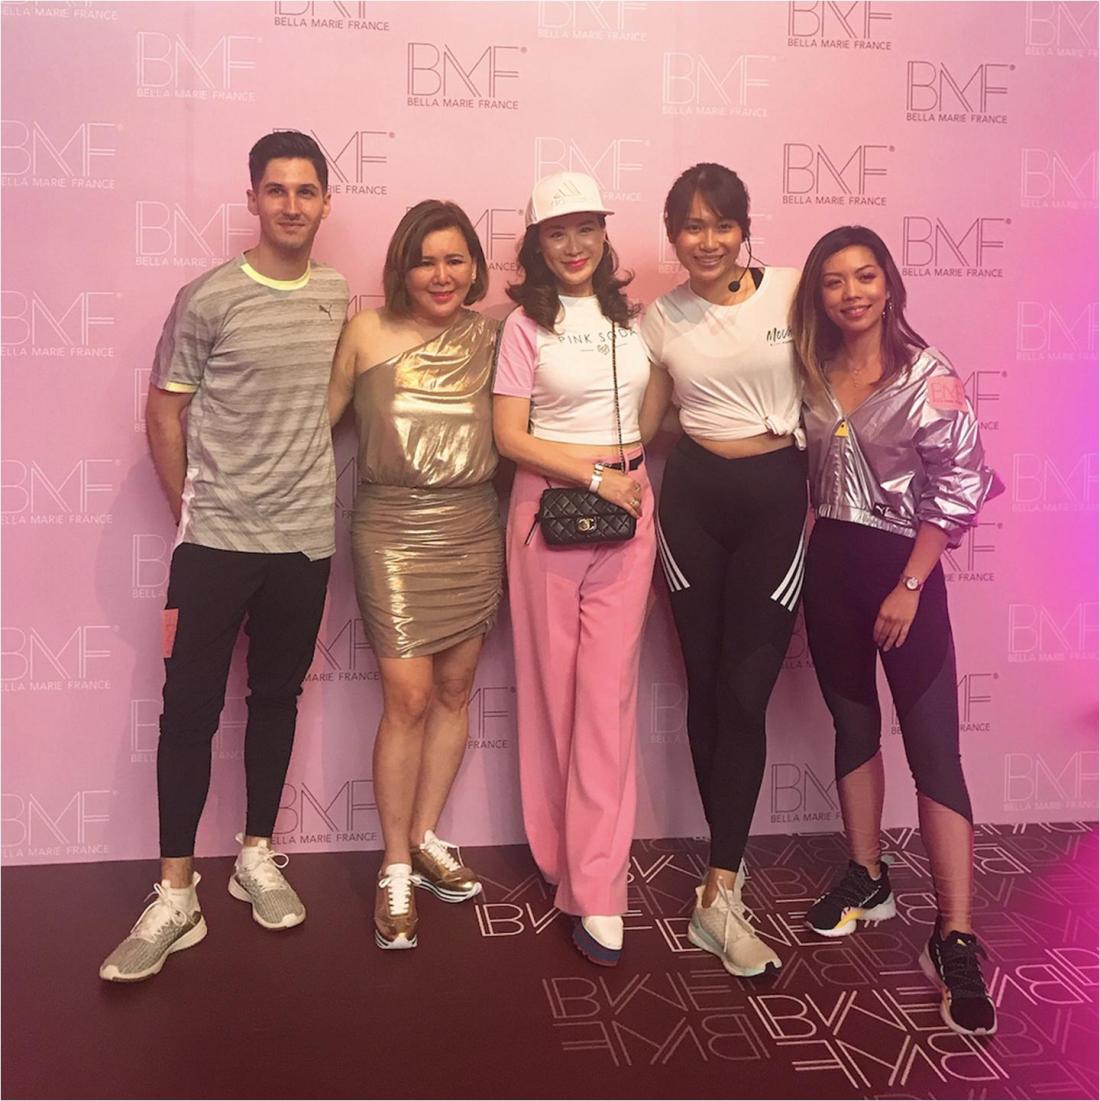 [Pamper.my] Scenes: BMF Celebrates the Launch of its BMF Beauty Gym Flagship Store